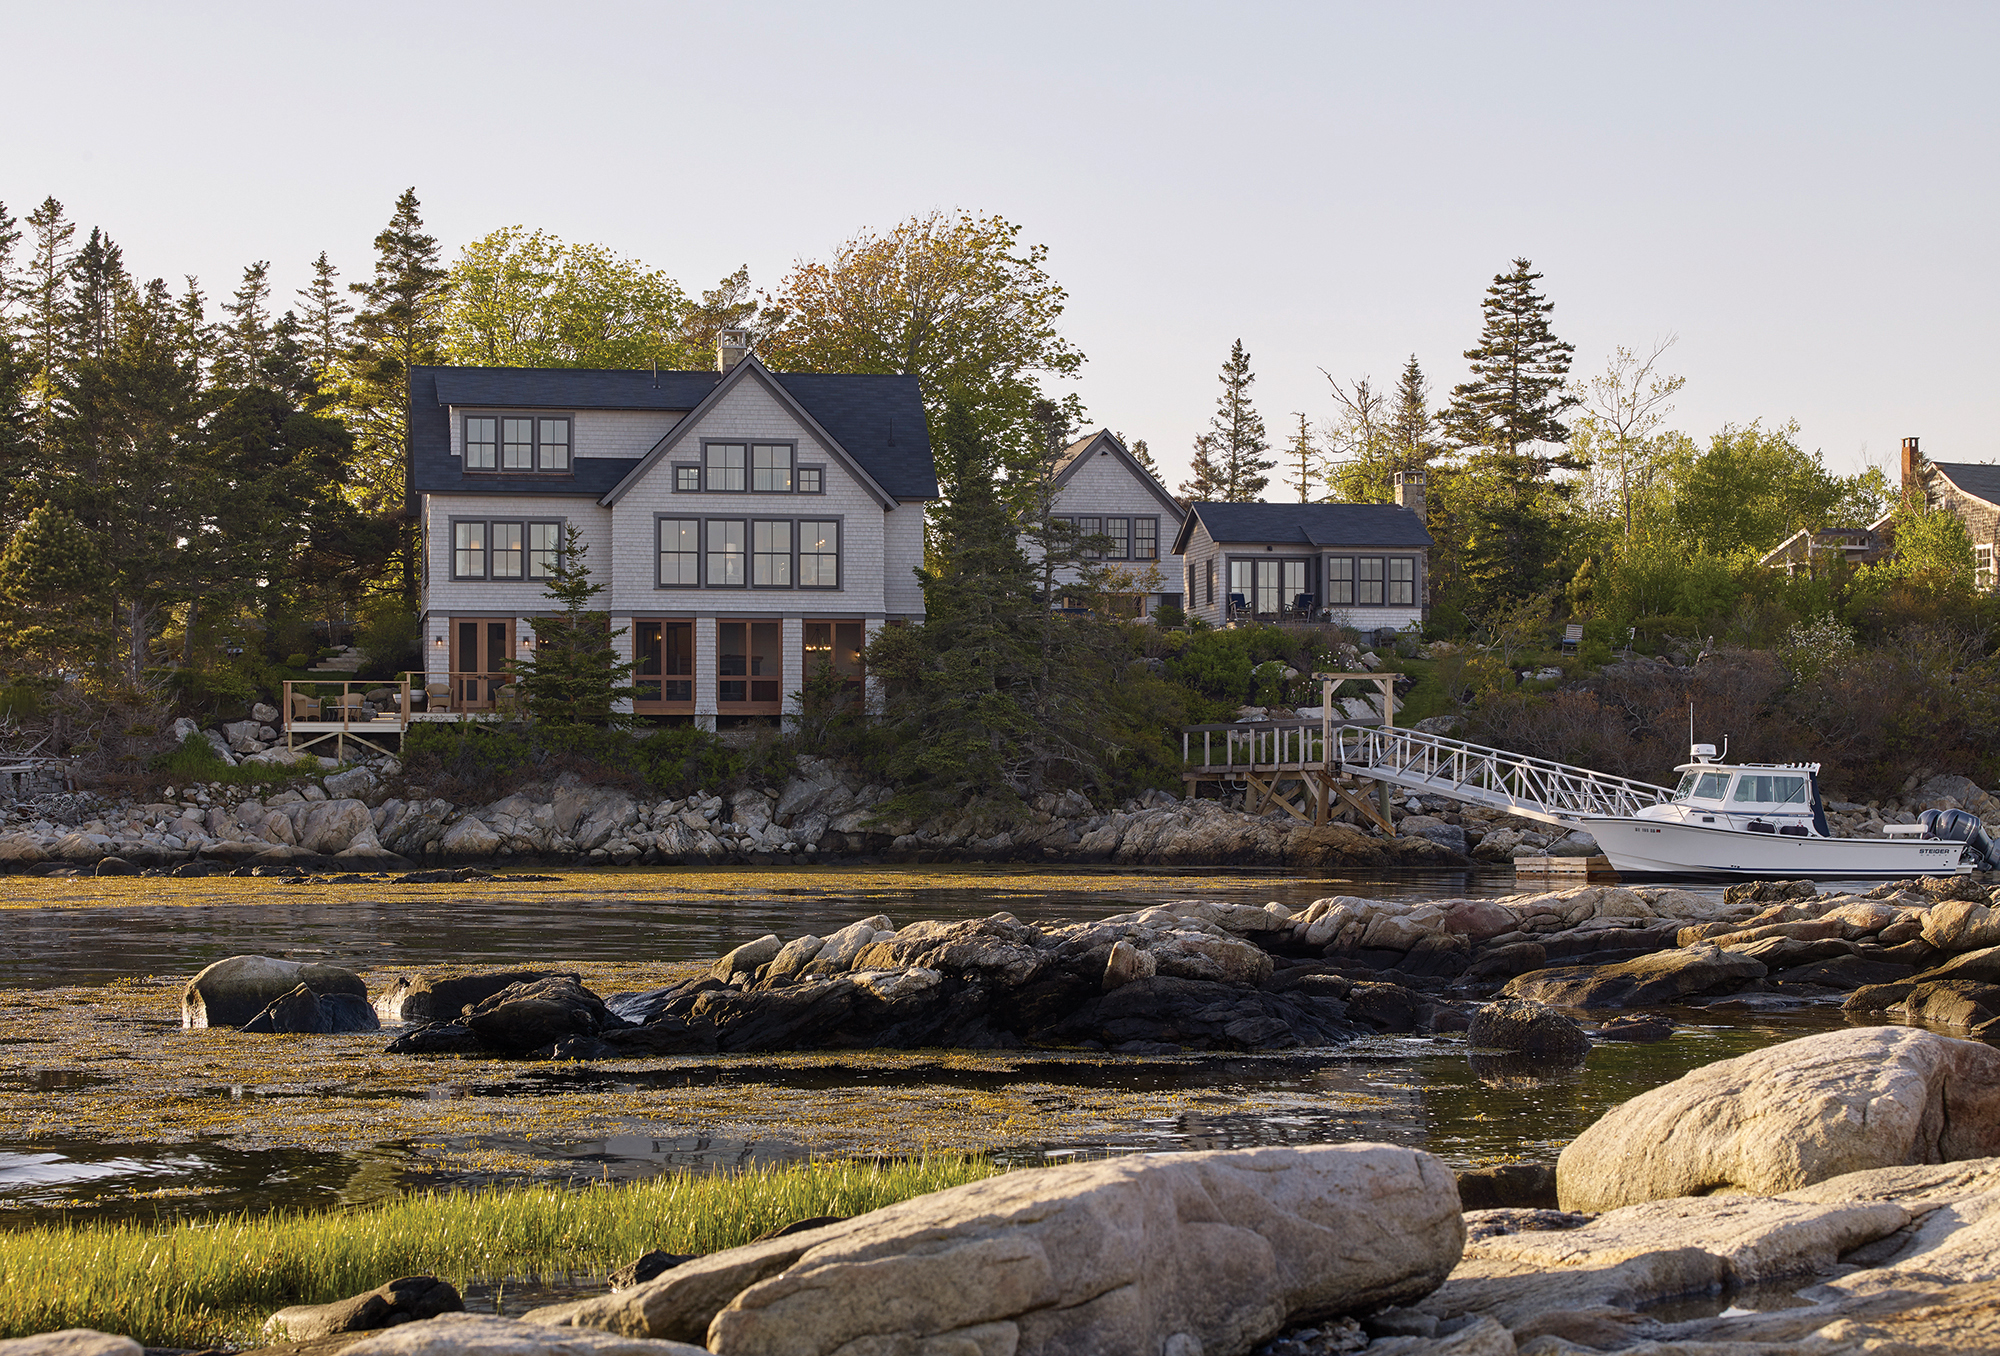 knickerbocker-group-project-boothbay-town-landing-house-maine-coastal-home